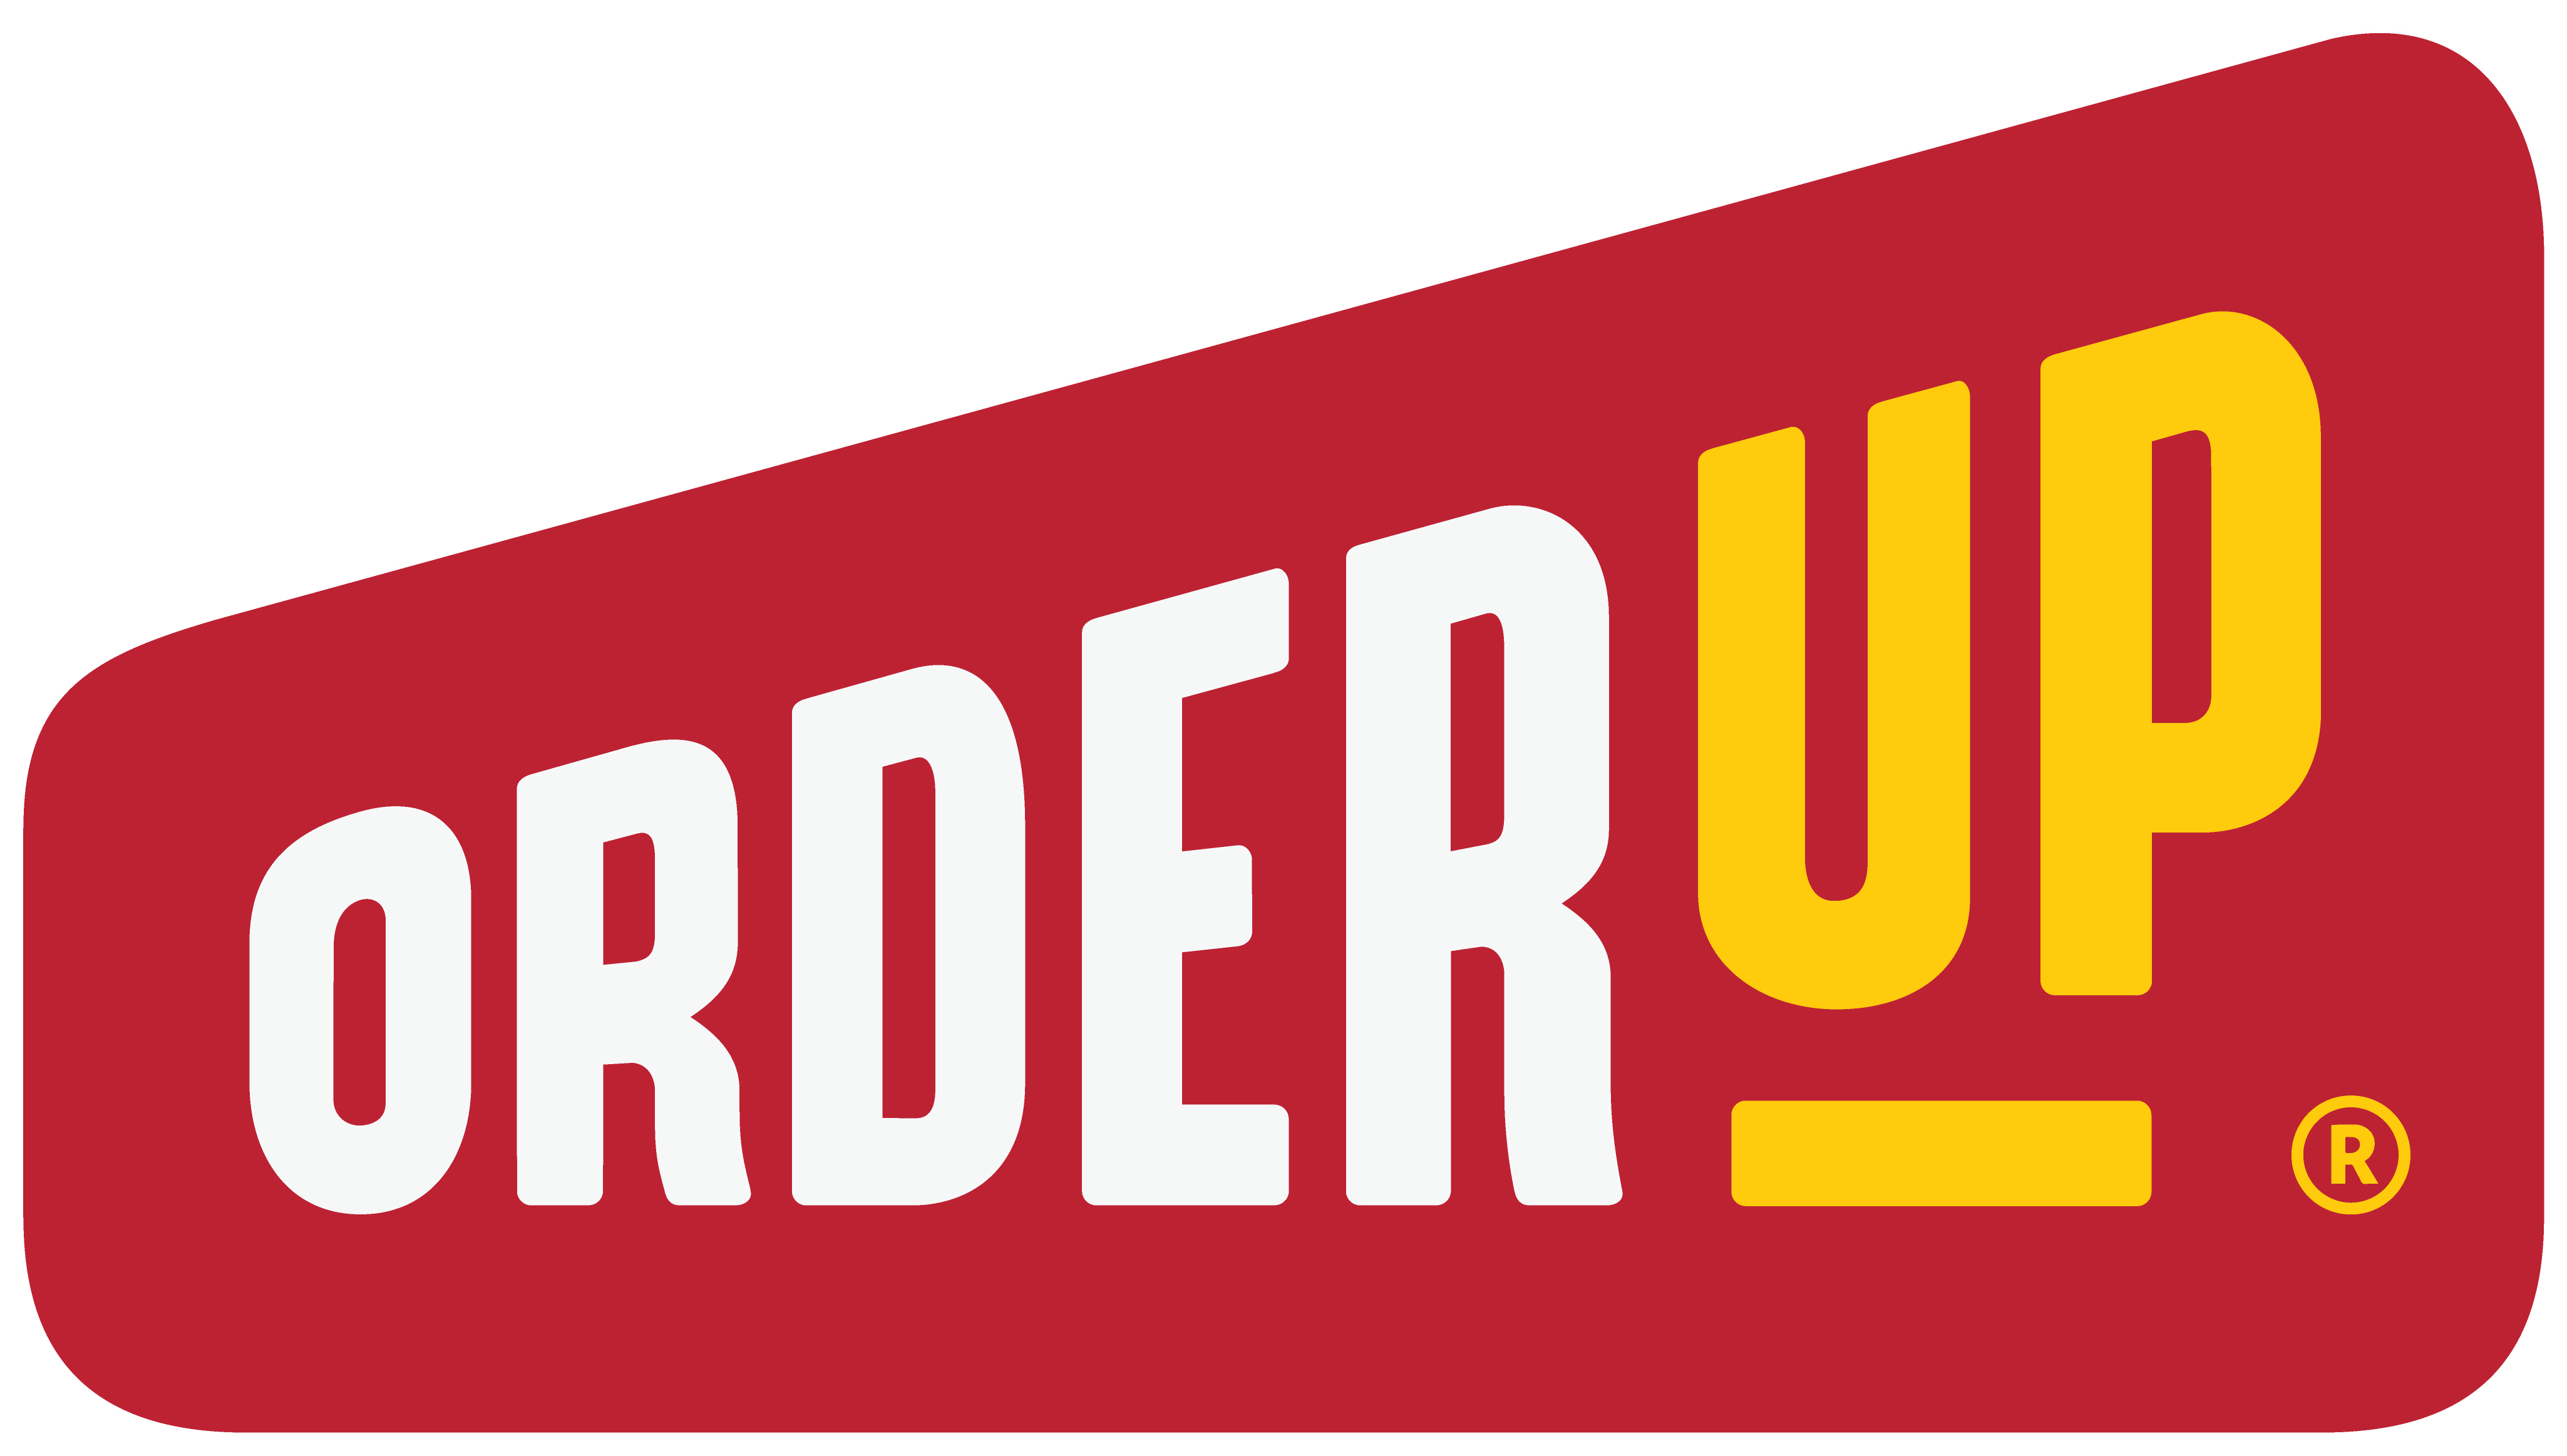 OrderUp from Groupon App Launches in Richmond, Offering On-demand Food Delivery from Top Local Restaurants | Business Wire